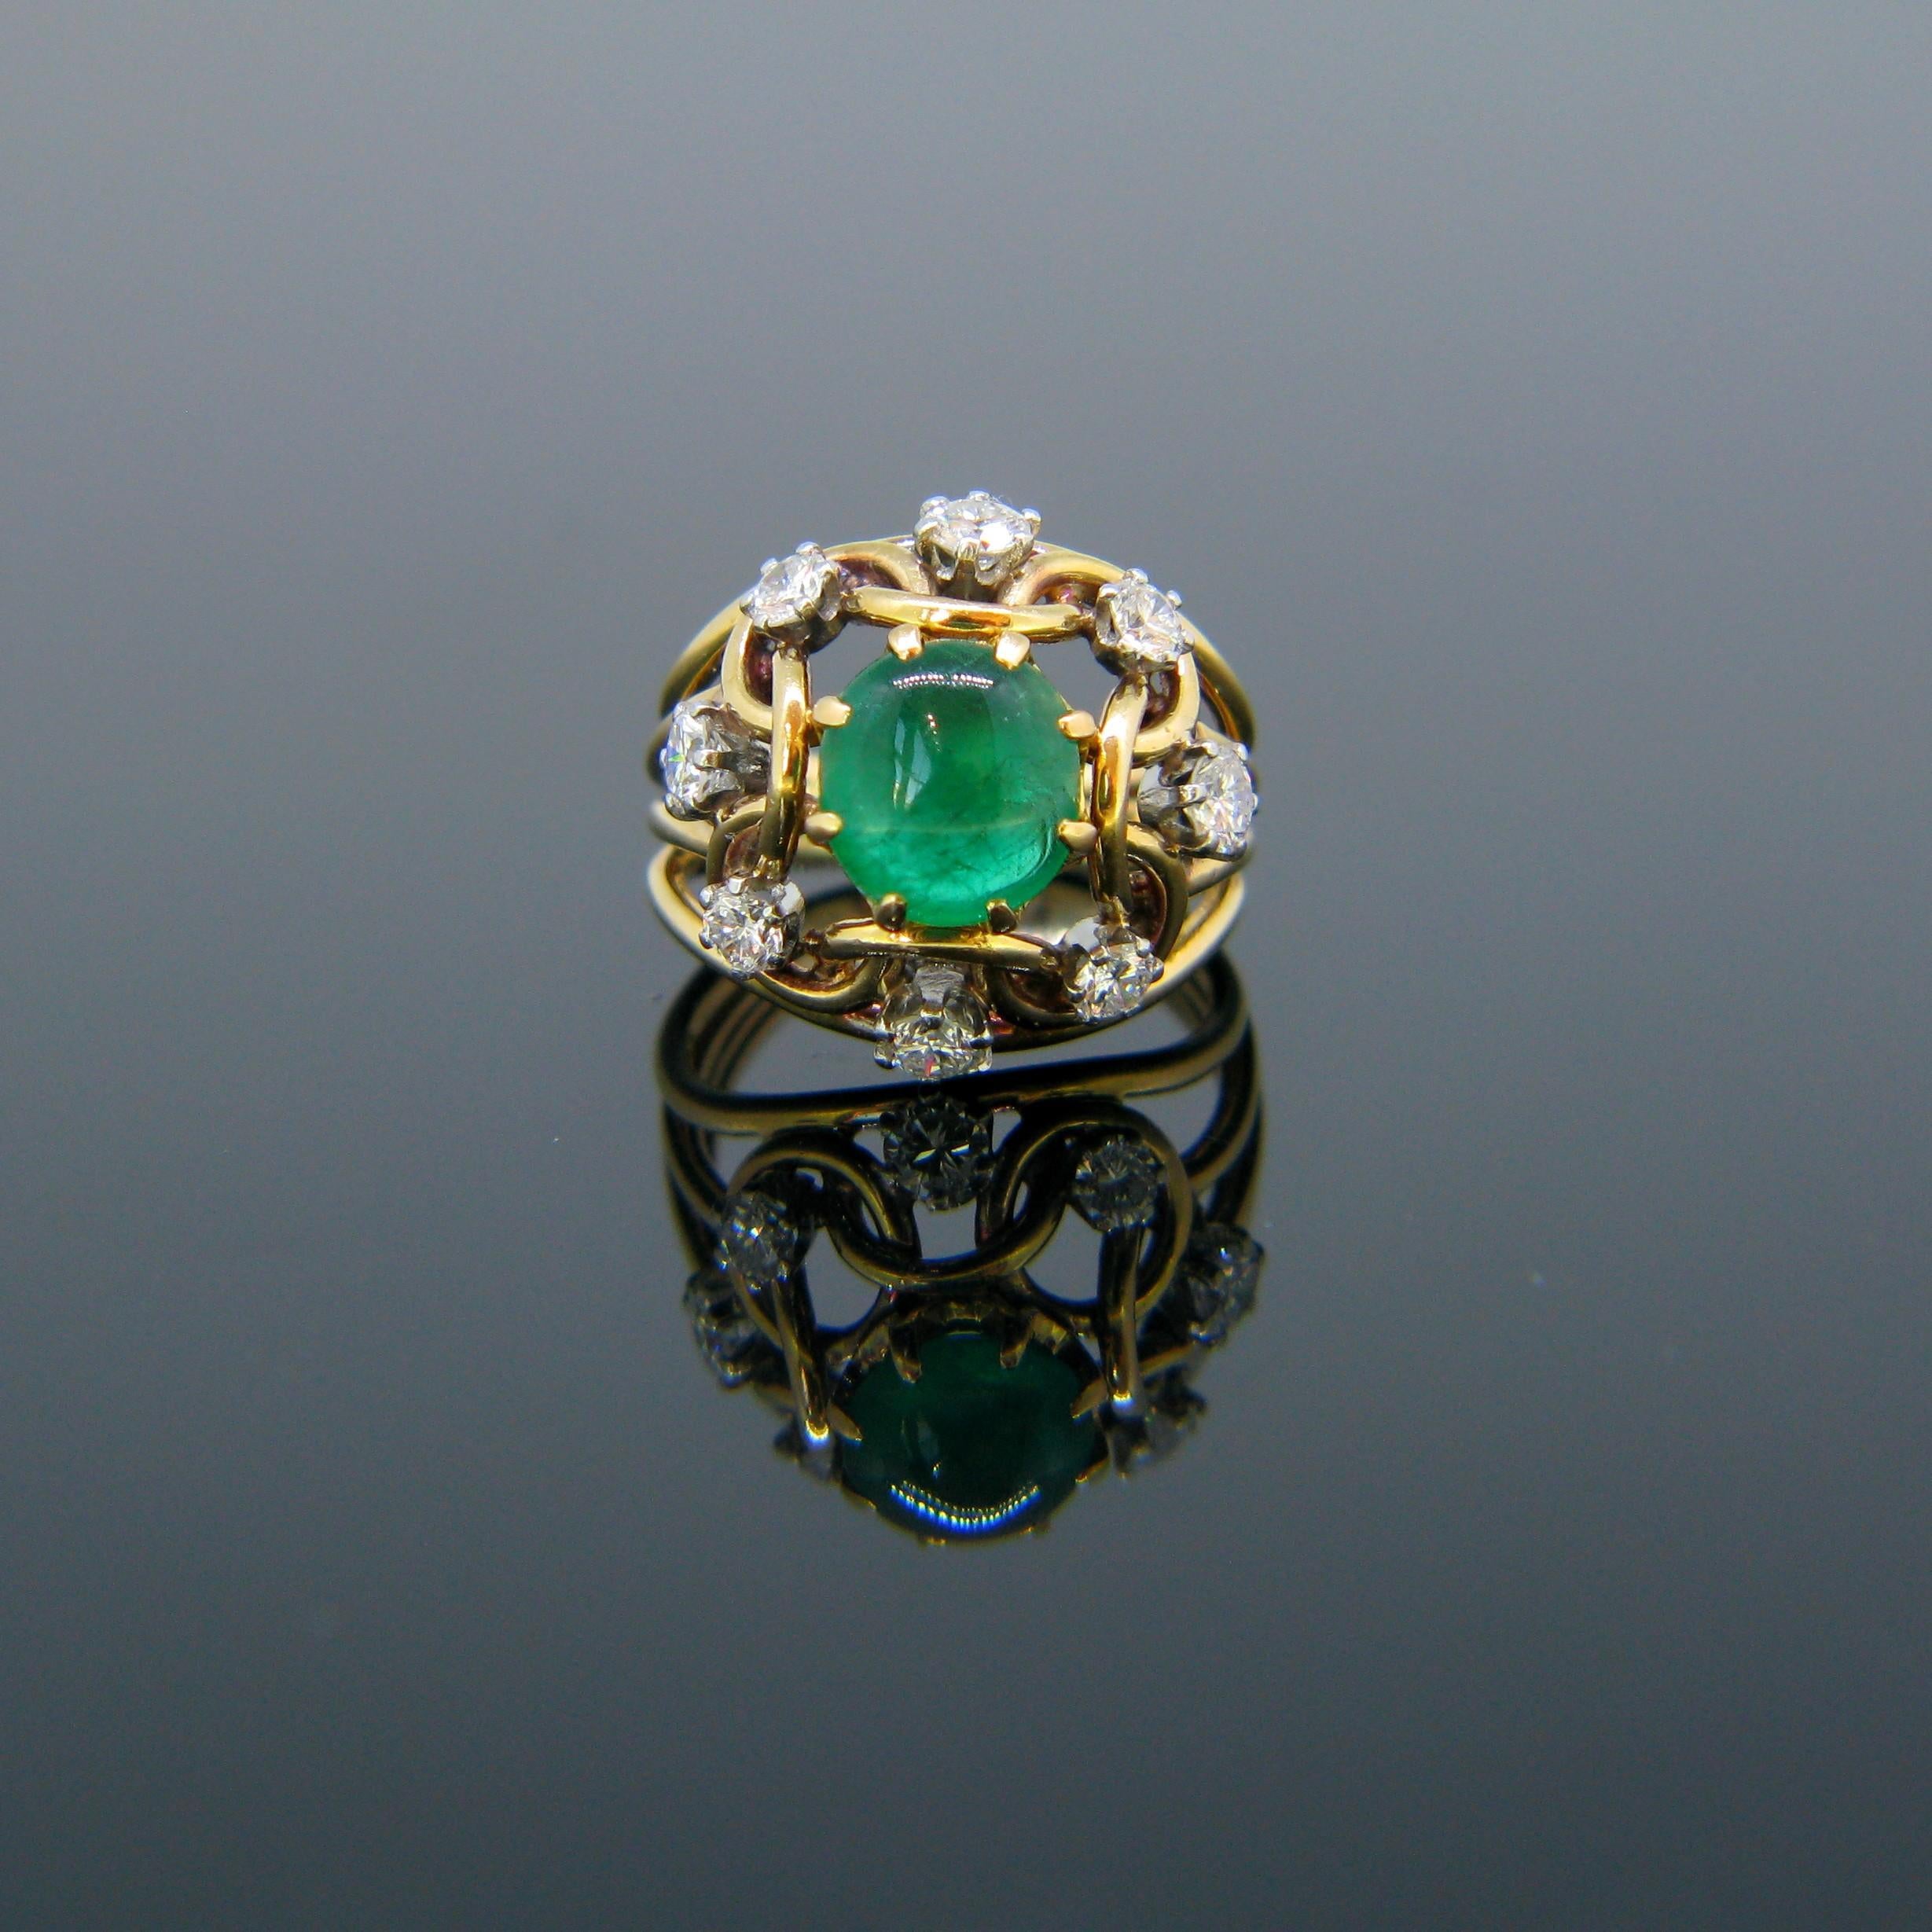 Weight:	7.8gr

Metal:	18kt Yellow Gold (tested)
	Platinum (tested)

Stones:	1 Emerald
•	Cut:	Cabochon
•	Carat weight:	1.5ct

Others:	8 Diamonds
•	Cut	Round Brilliant
•	Total carat Weight:	0.8ct